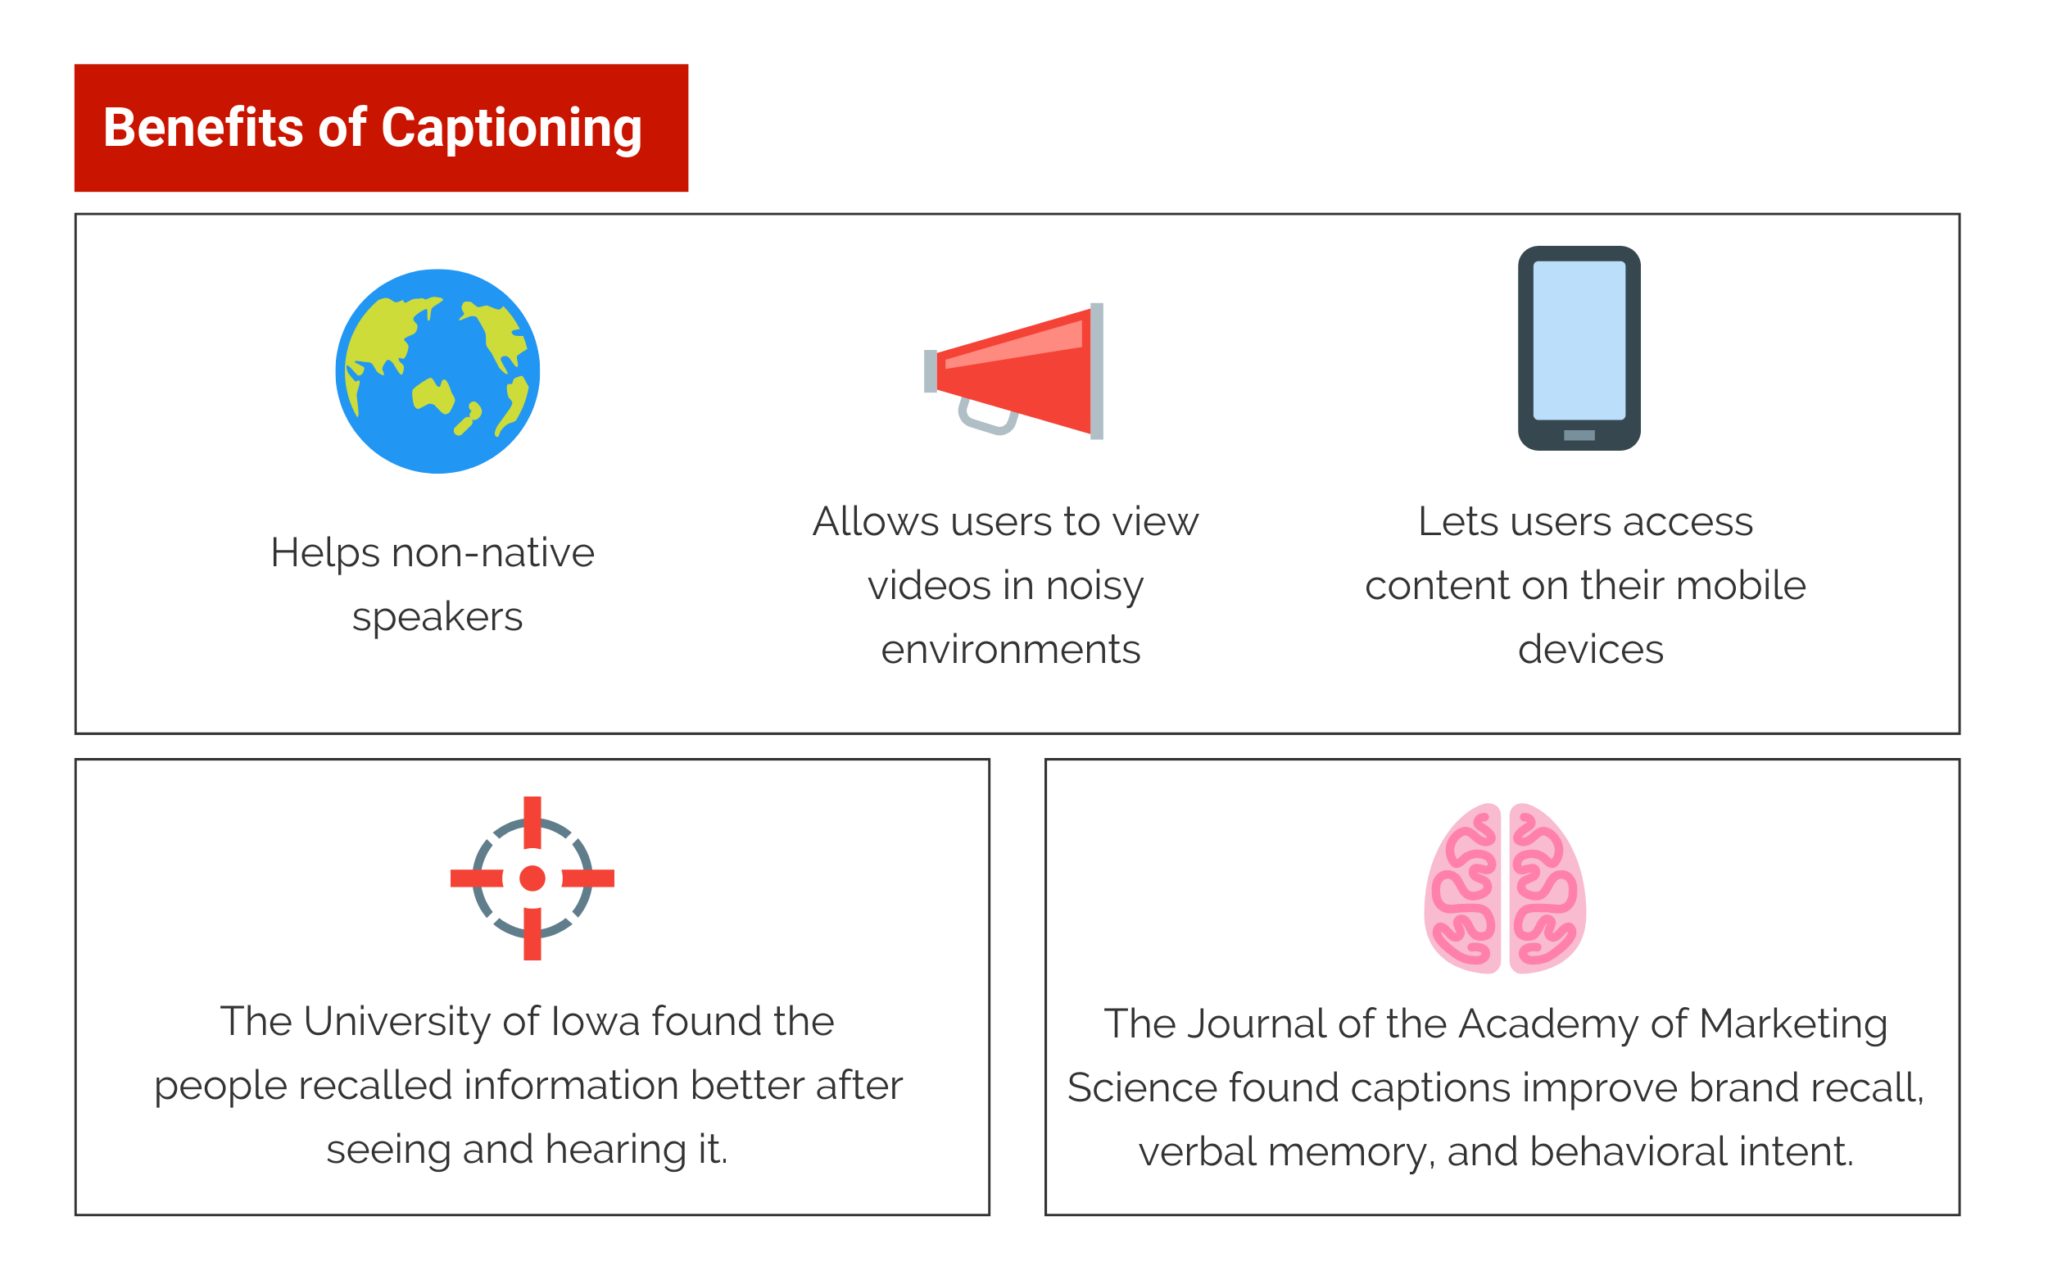 Benefits of captioning Helps non-native speakers Allows users to view videos in noisy environments Lets users access content on their mobiles The University of Iowa found the people recalled information better after seeing and hearing it.  The Journal of the Academy of Marketing Science found captions improve brand recall, verbal memory, and behavioral intent.